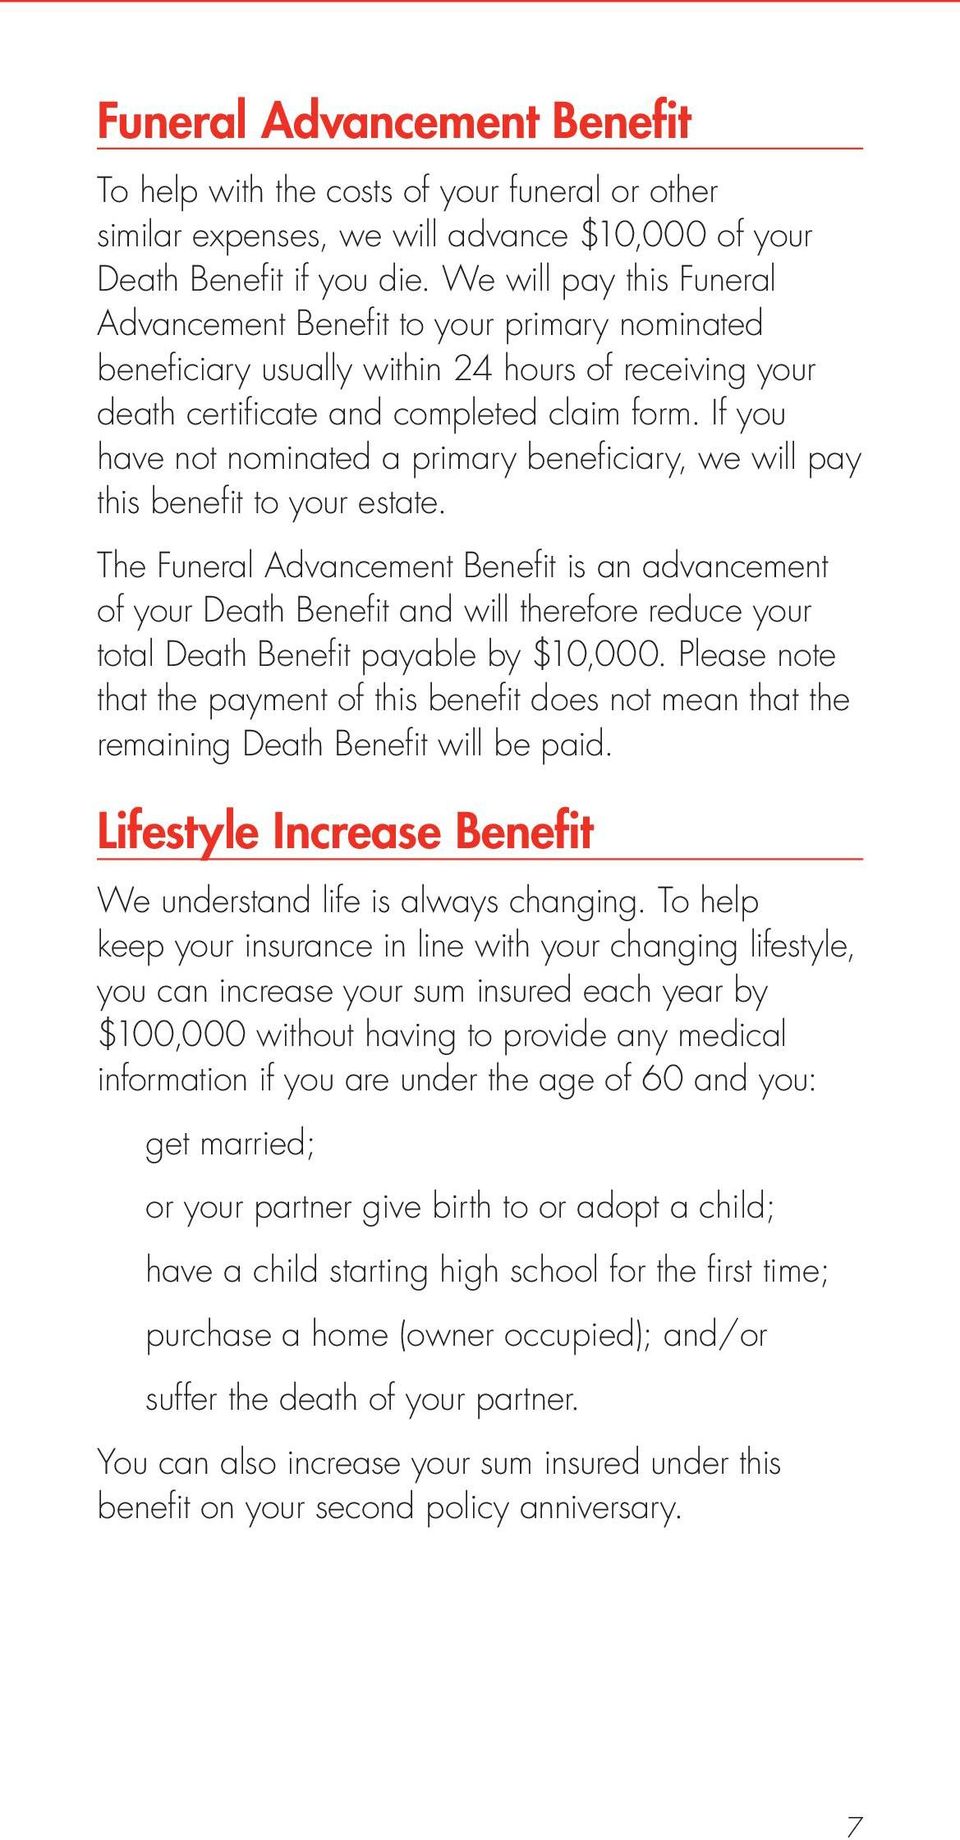 If you have not nominated a primary beneficiary, we will pay this benefit to your estate.